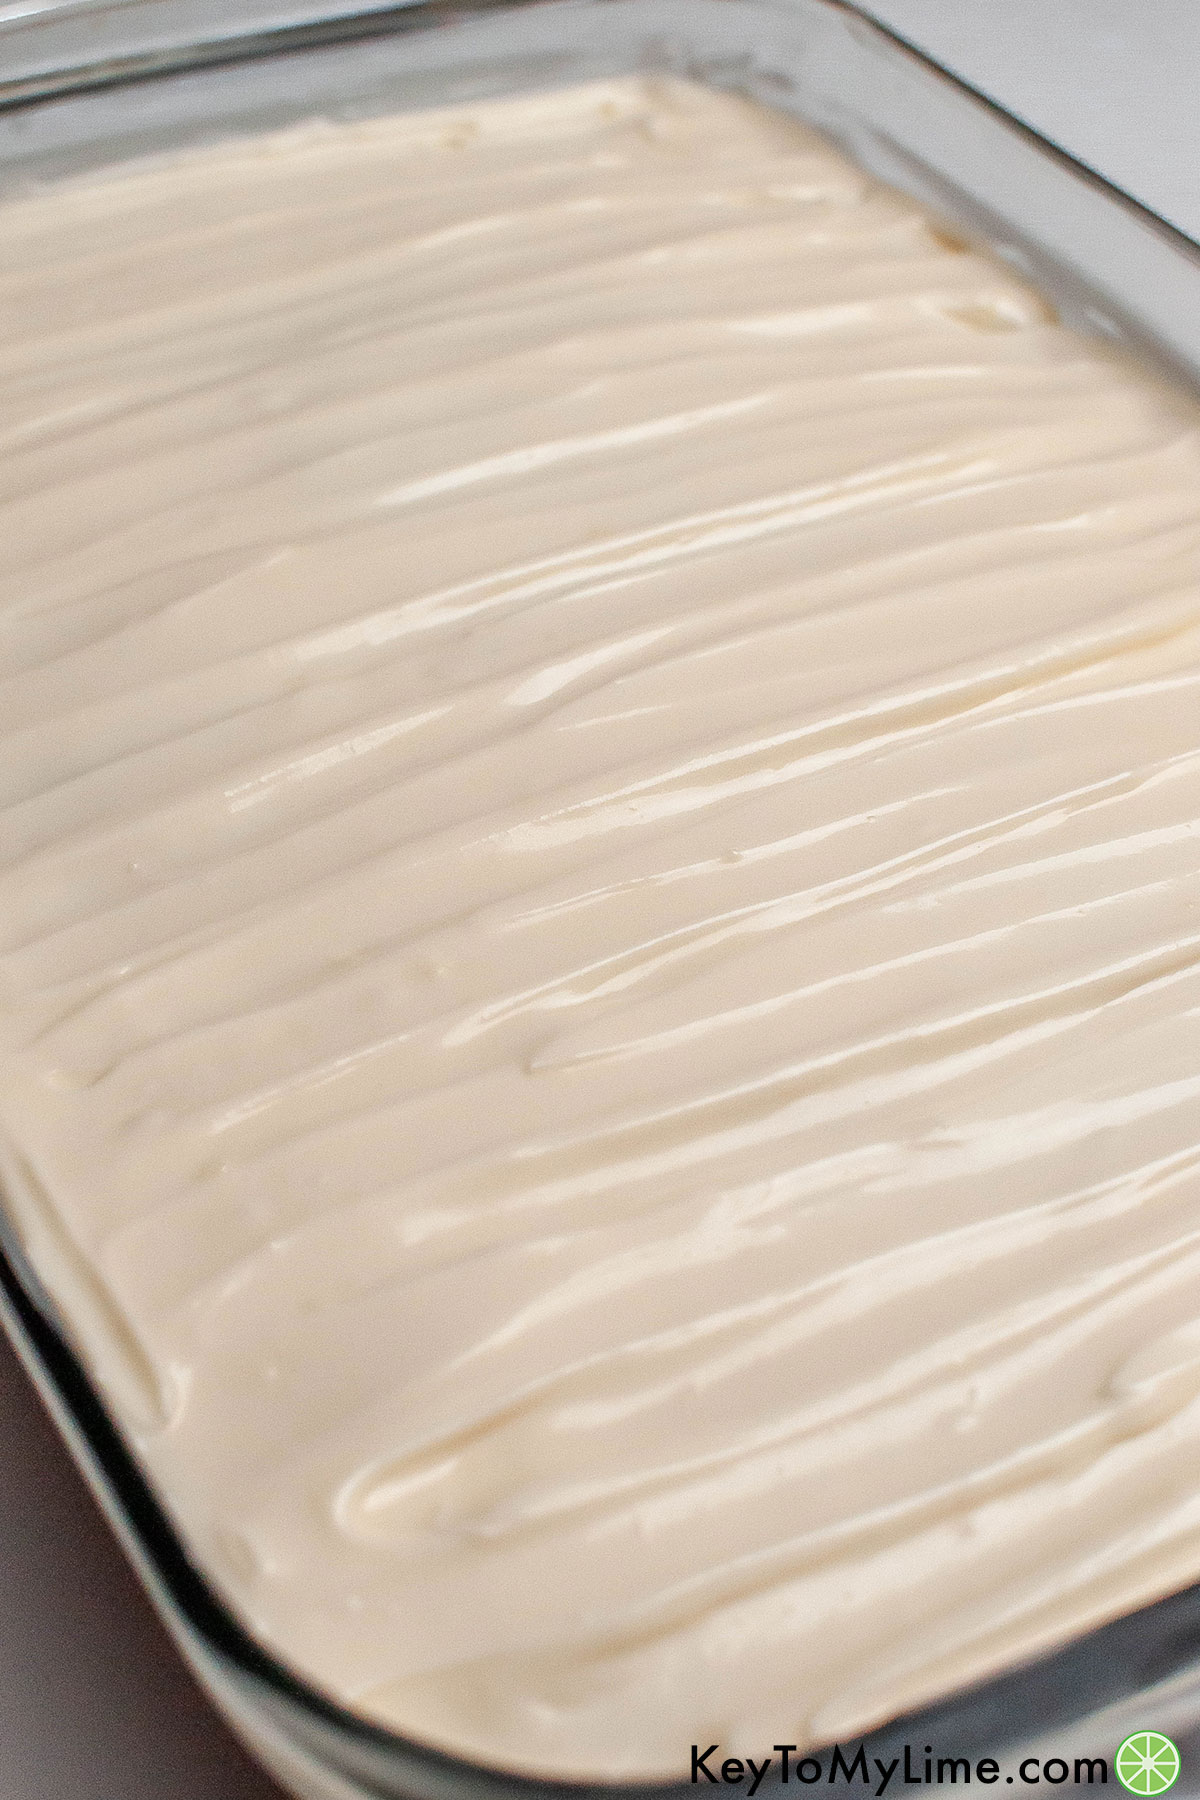 An image showing the texture of the cream cheese frosting spread out over the pumpkin cake.